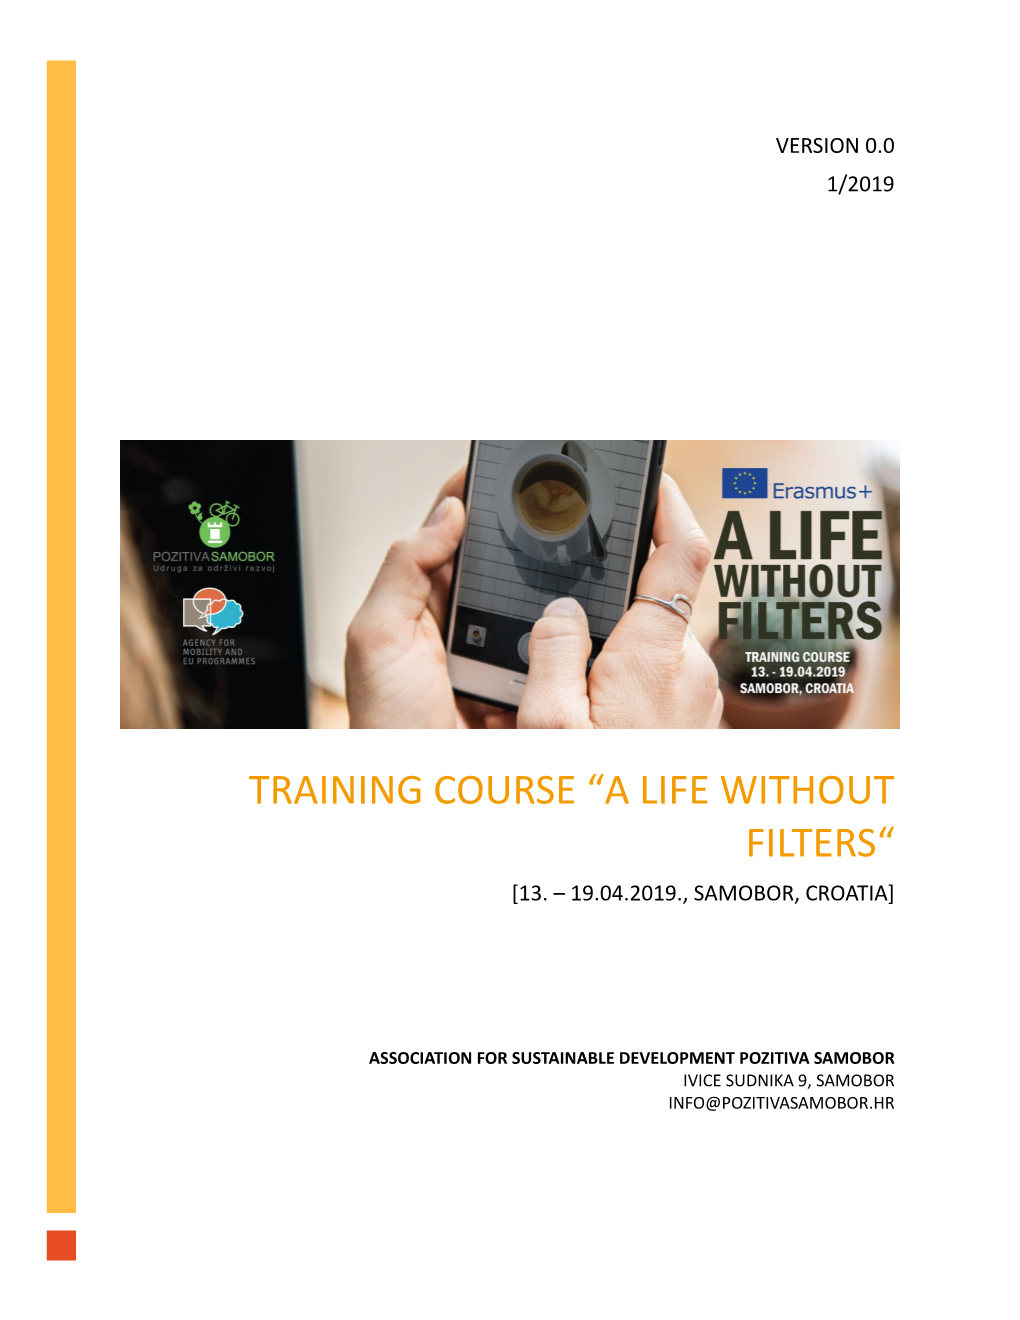 Training Course “A Life Without Filters“ [13